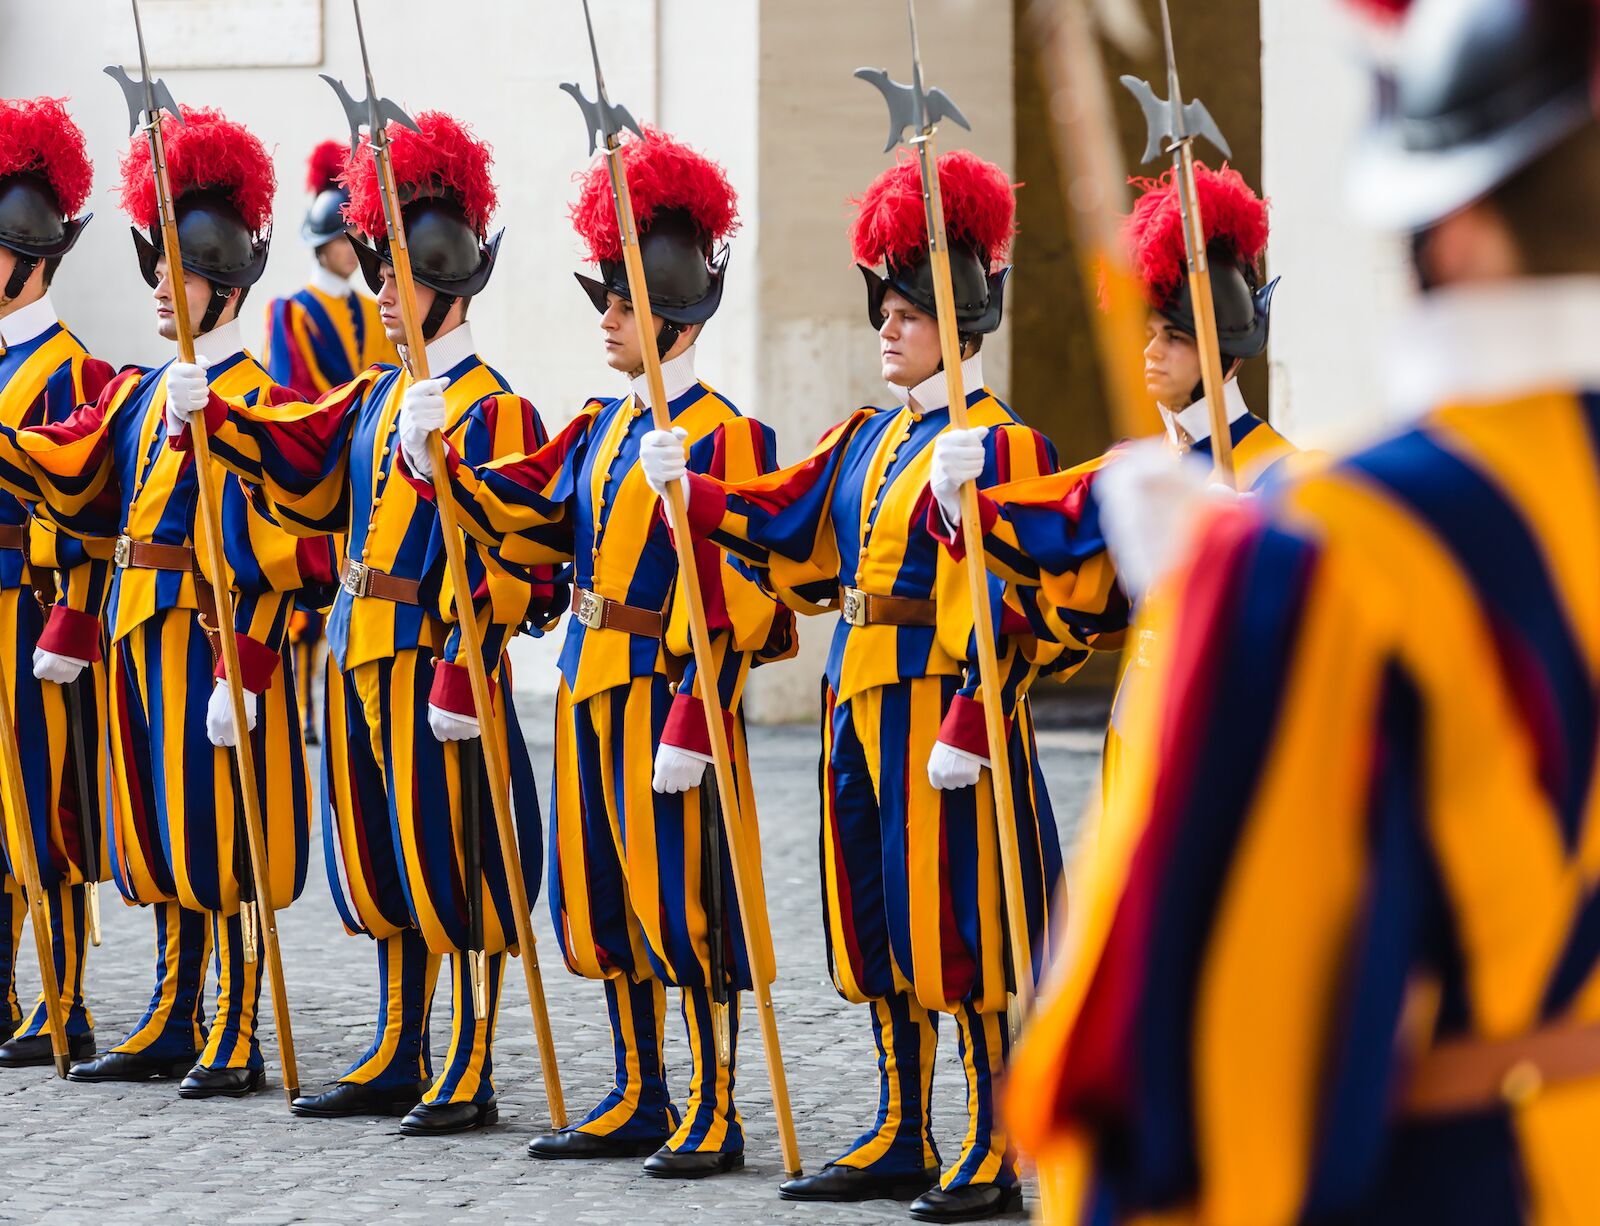 The Swiss Guards in Vatican City